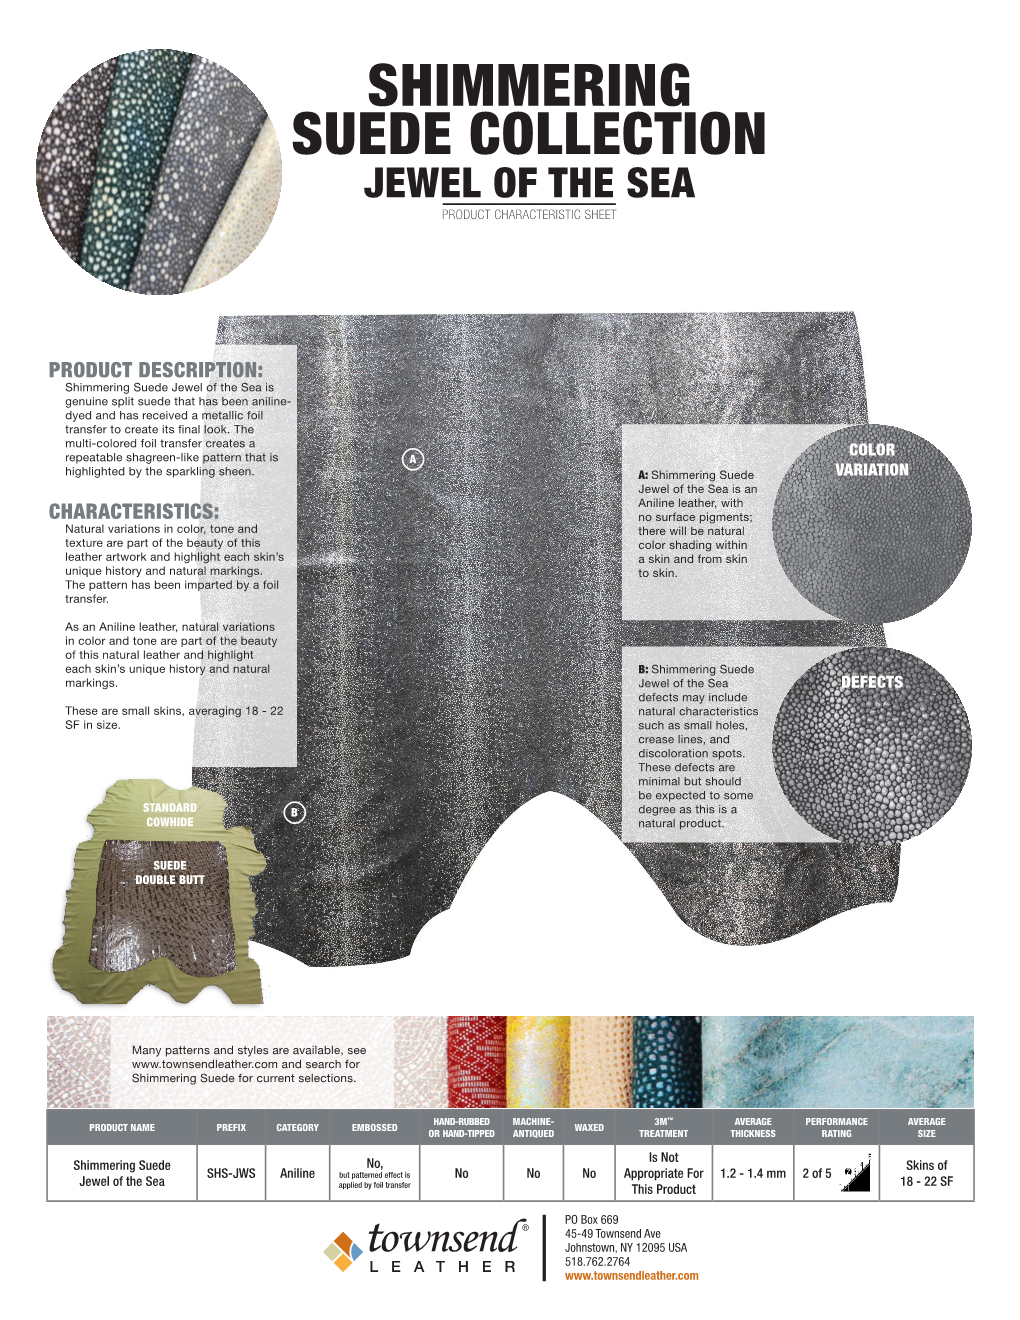 Shimmering Suede Jewel of the Sea Is Genuine Split Suede That Has Been Aniline- Dyed and Has Received a Metallic Foil Transfer to Create Its Final Look